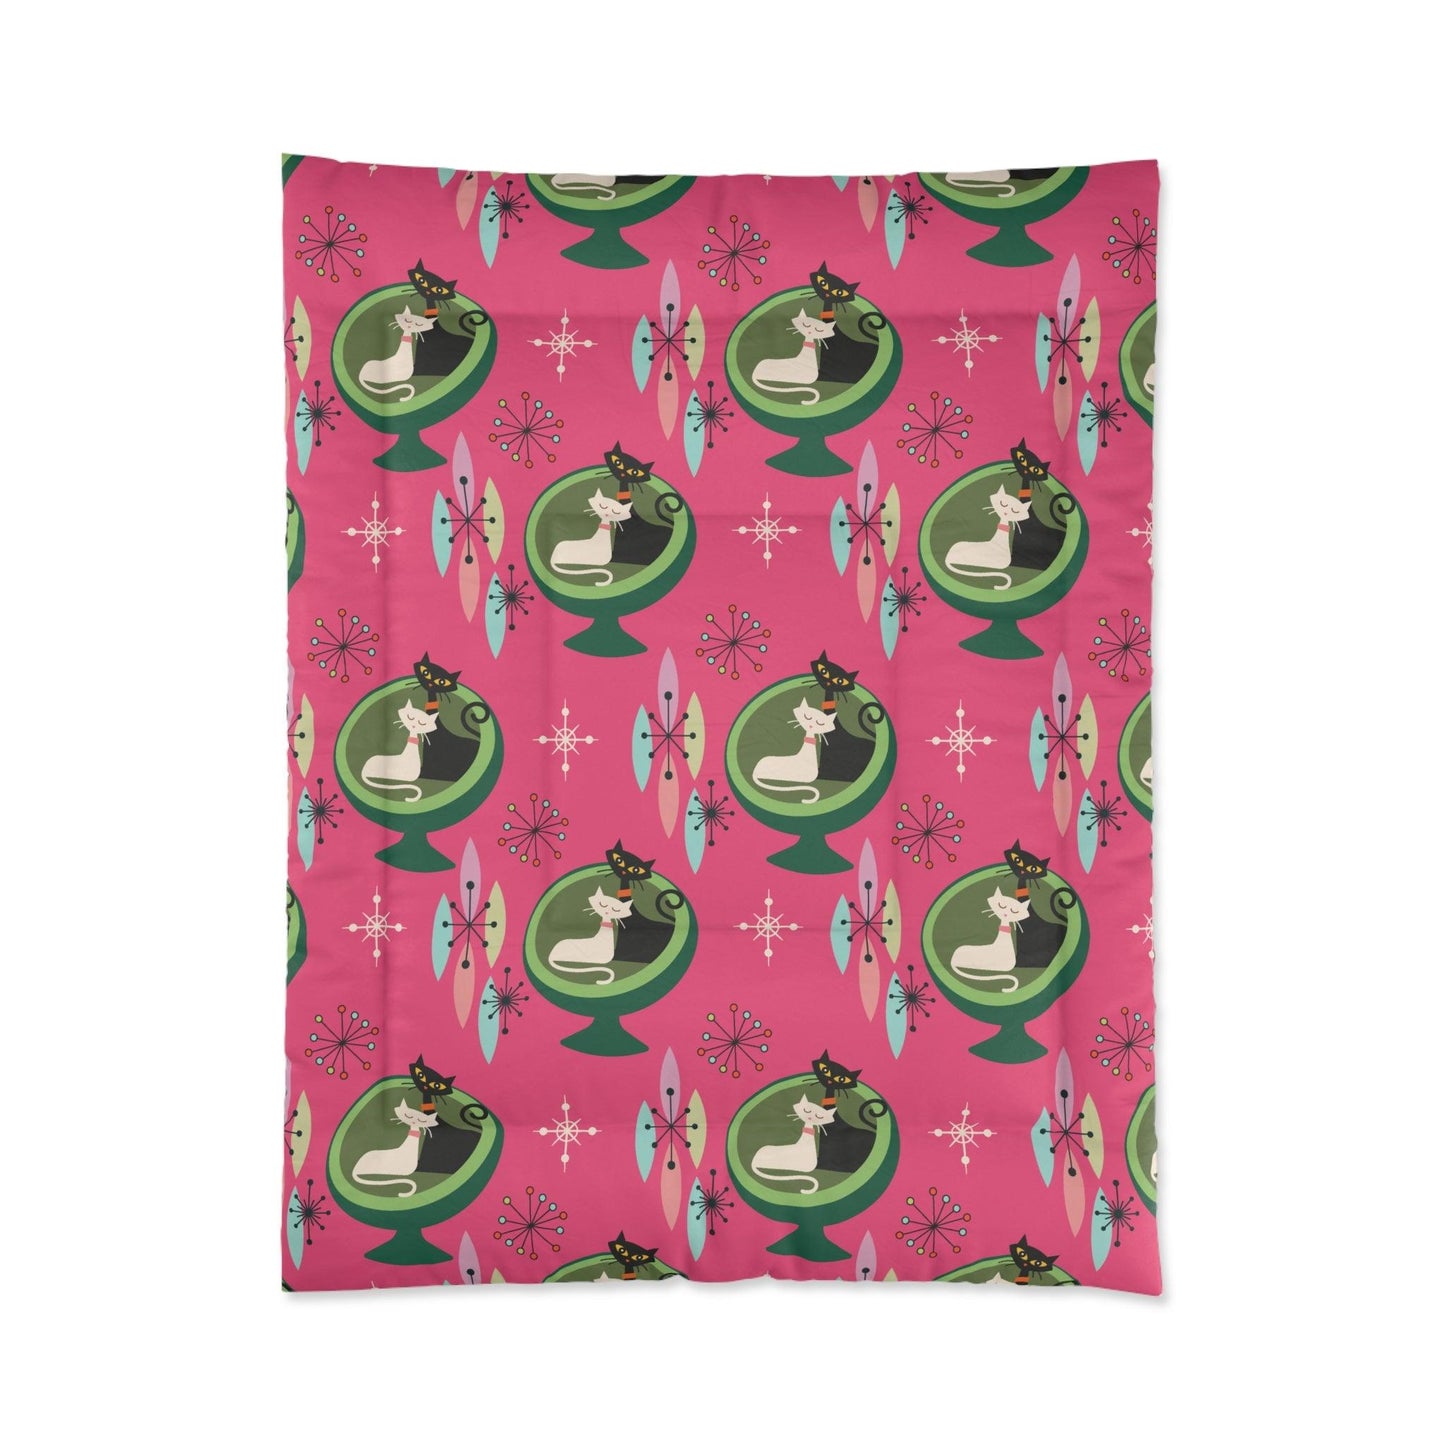 Retro 50s Atomic Cat Couple in Ball Chair Mid Century Mod Pink & Green Comforter | lovevisionkarma.com